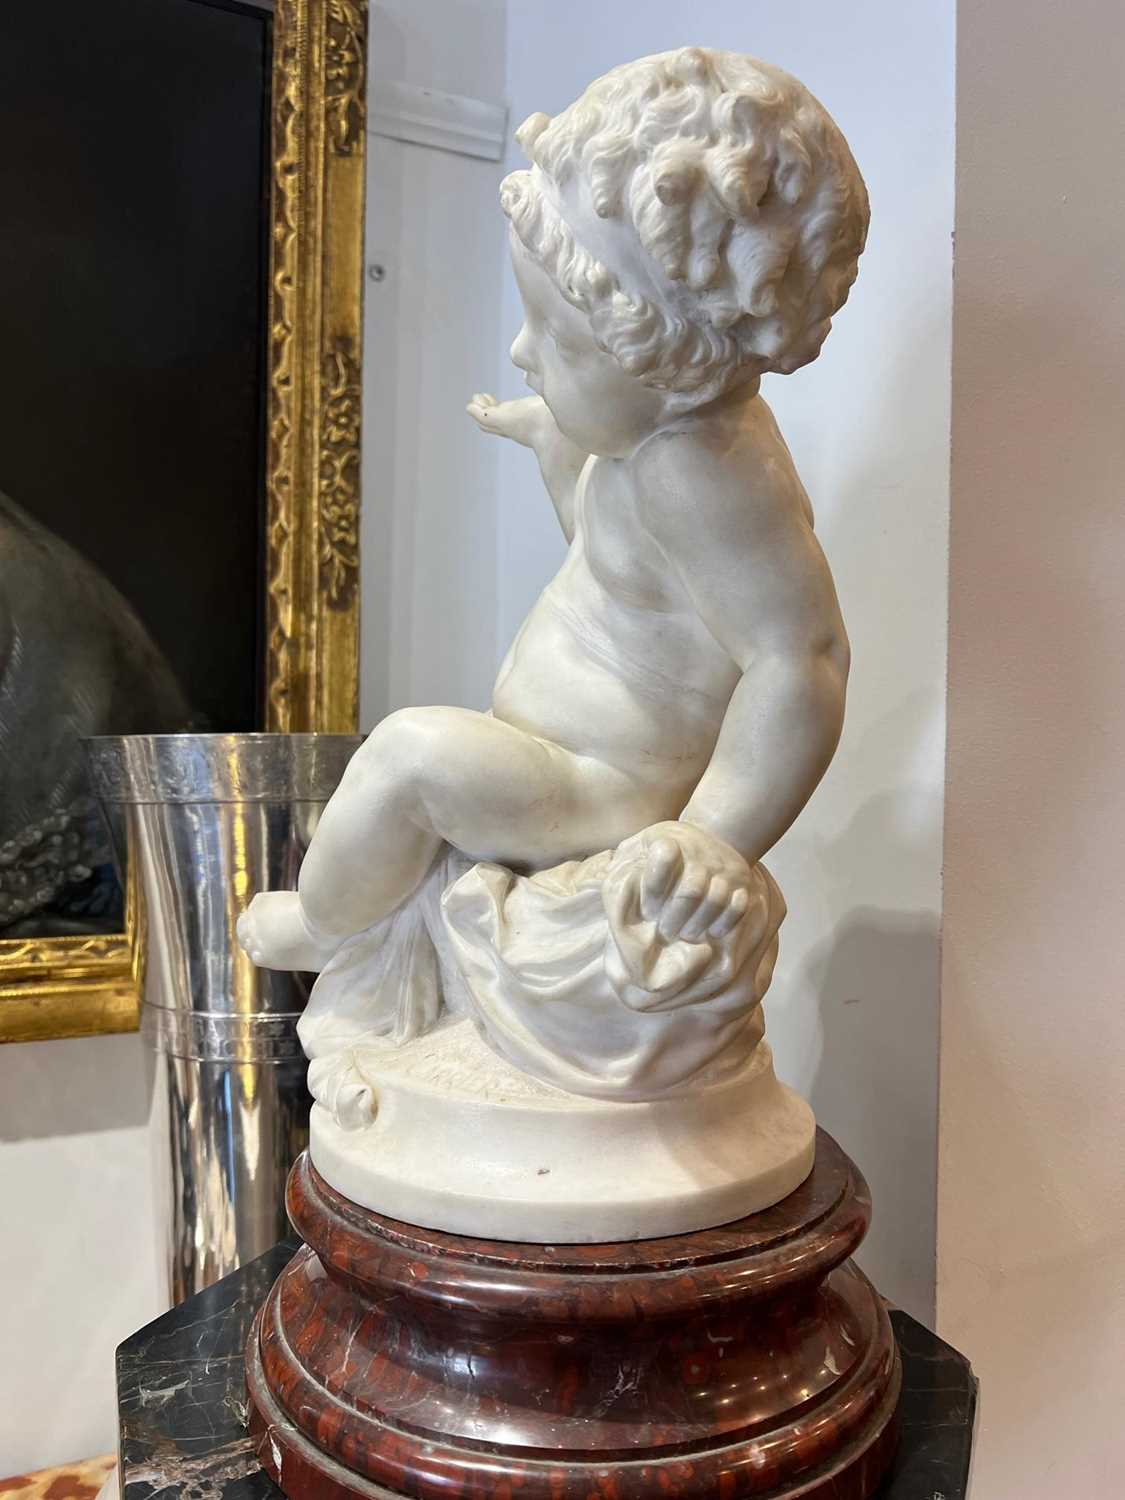 ALBERT CARRIER-BELLEUSE (FRENCH, 1824 -1887): A CARRARA MARBLE PUTTO - Image 10 of 11